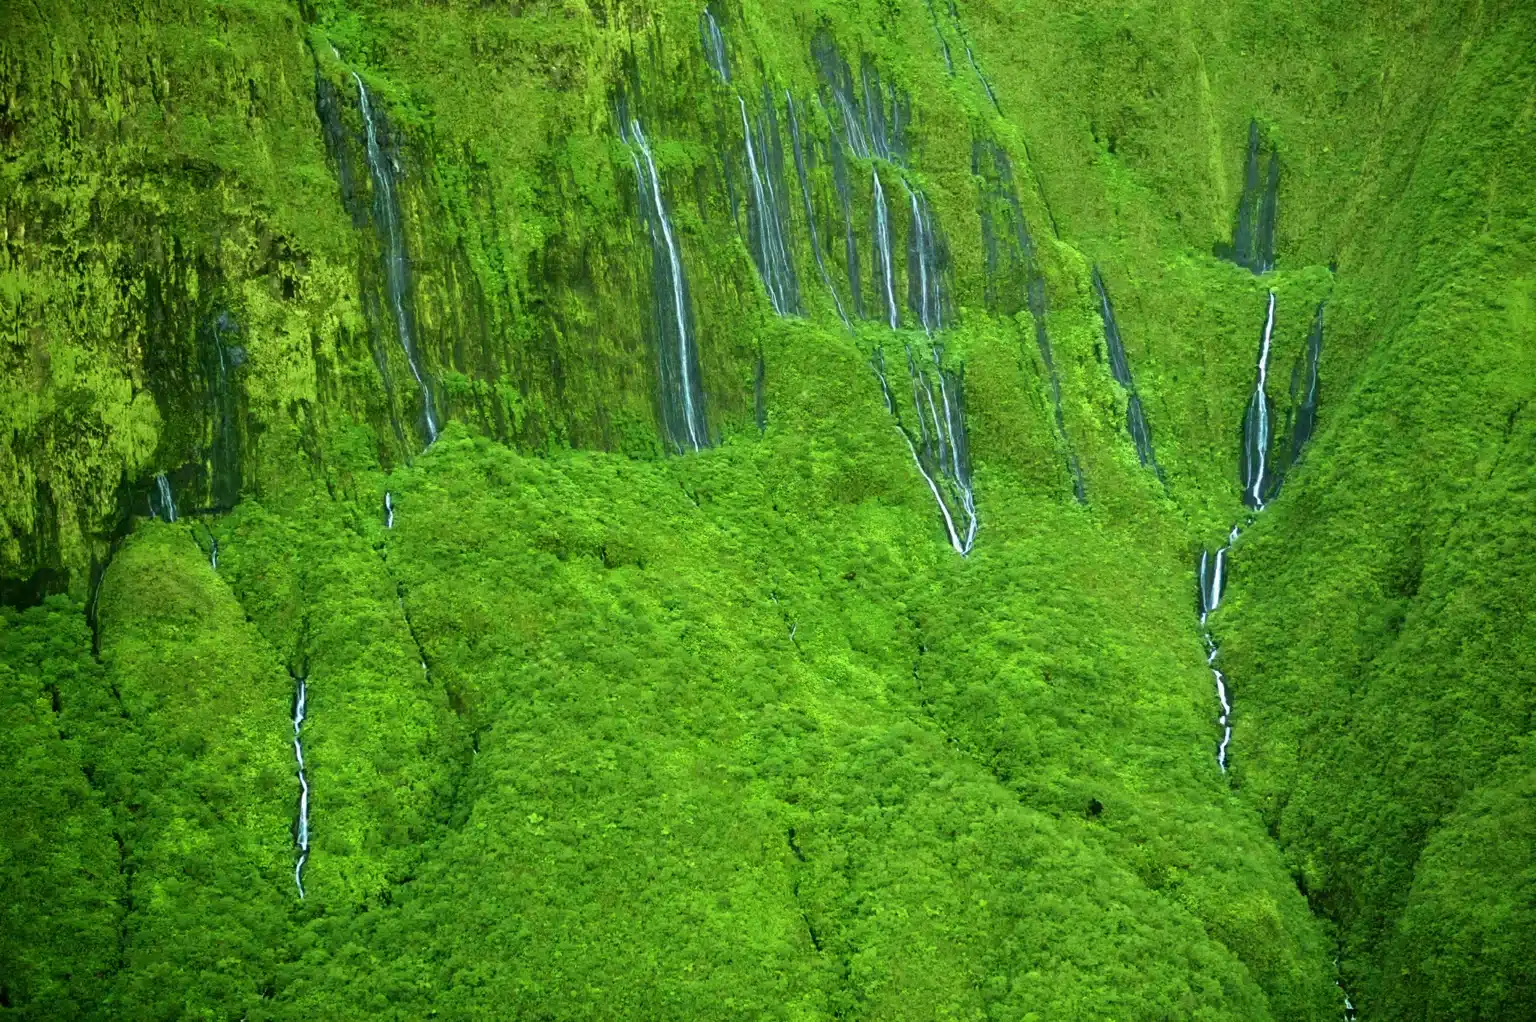 Wall of Tears: Waterfall Attraction in the town of Hana on Maui